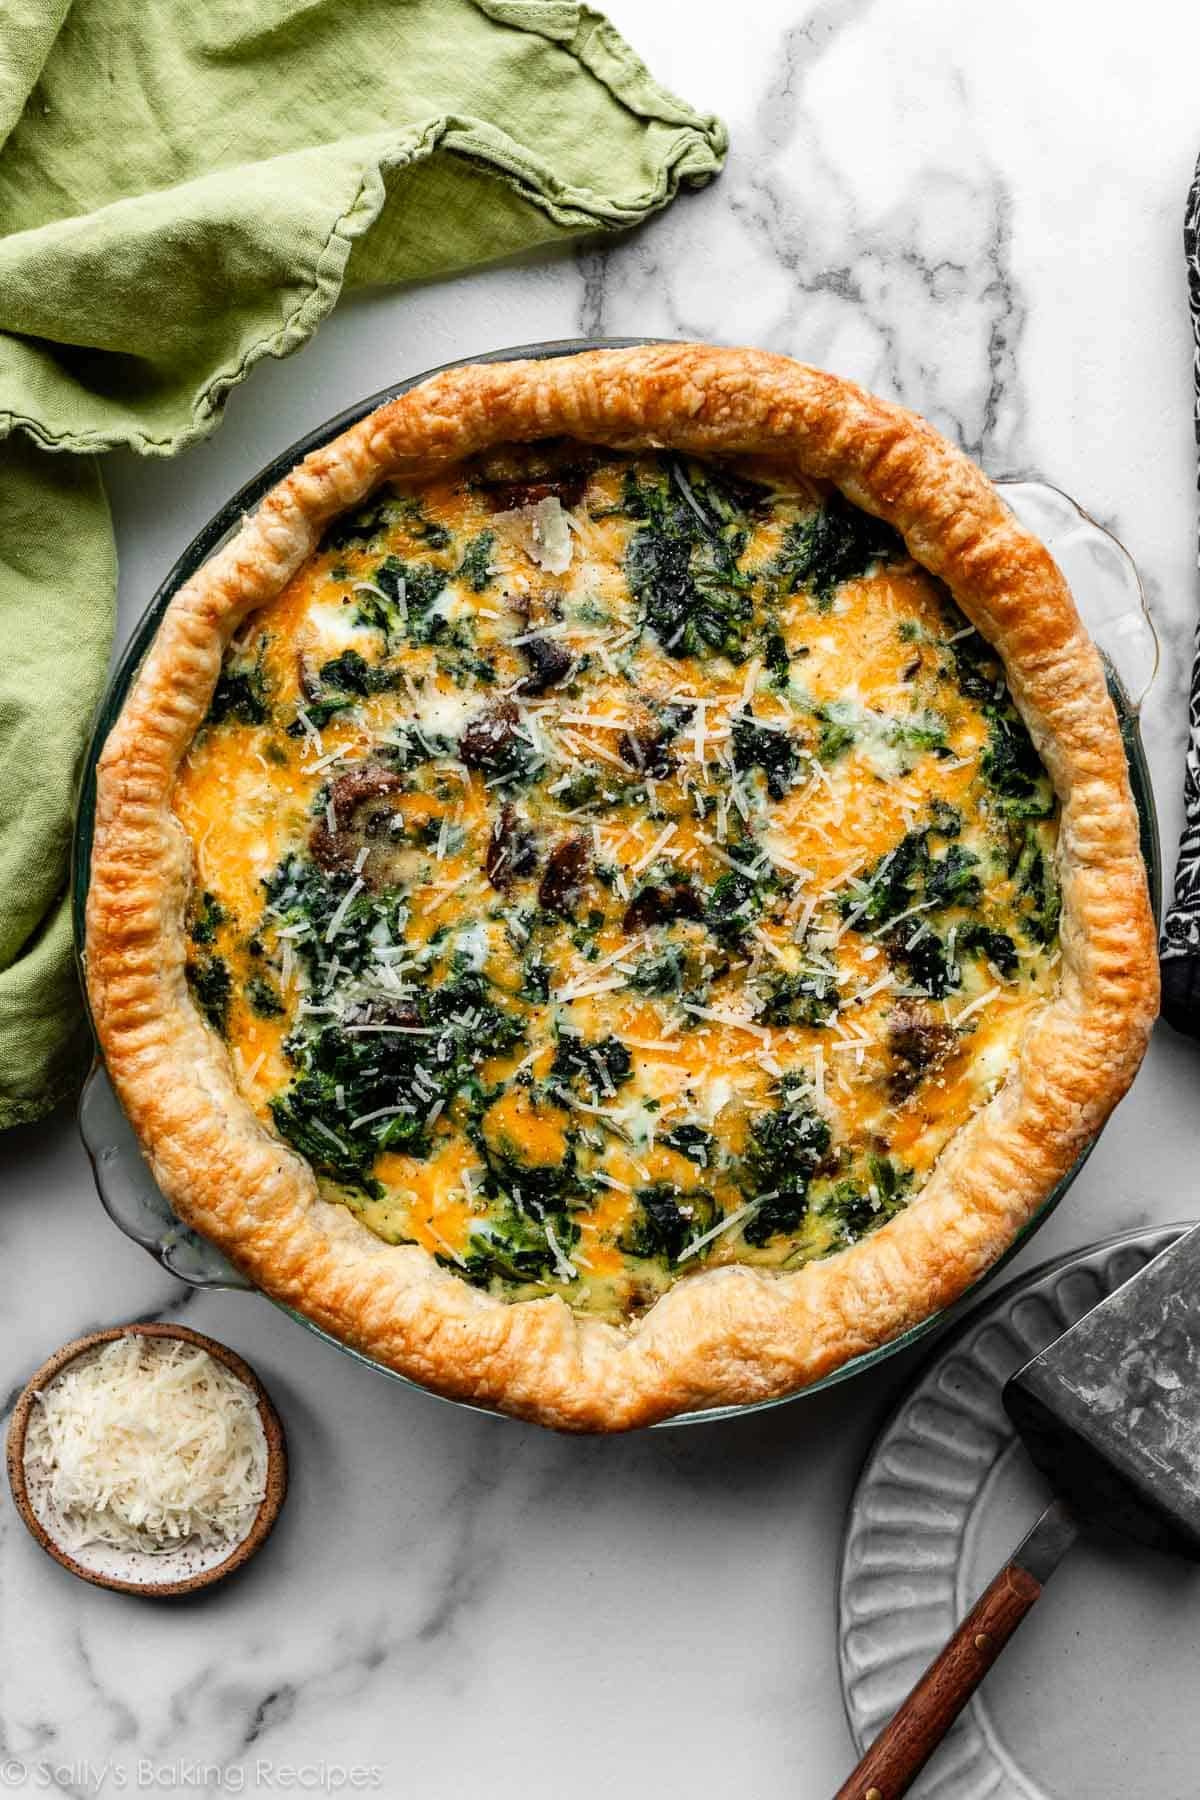 cheesy spinach quiche in pie crust with fresh parmesan cheese sprinkled on top.